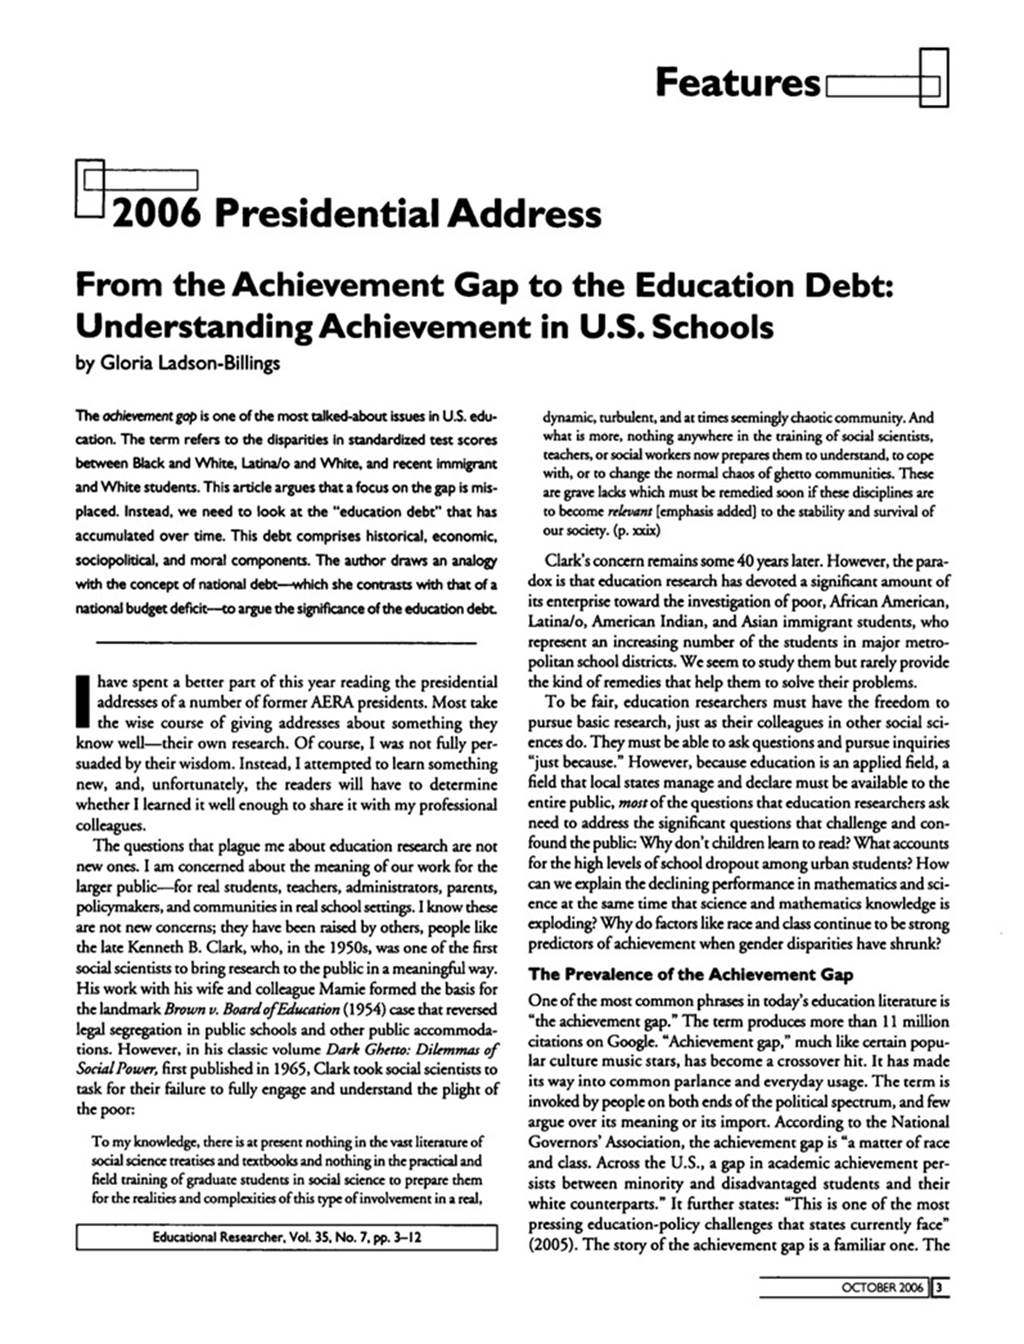 From the Achievement Gap to the Education Debt - Document image